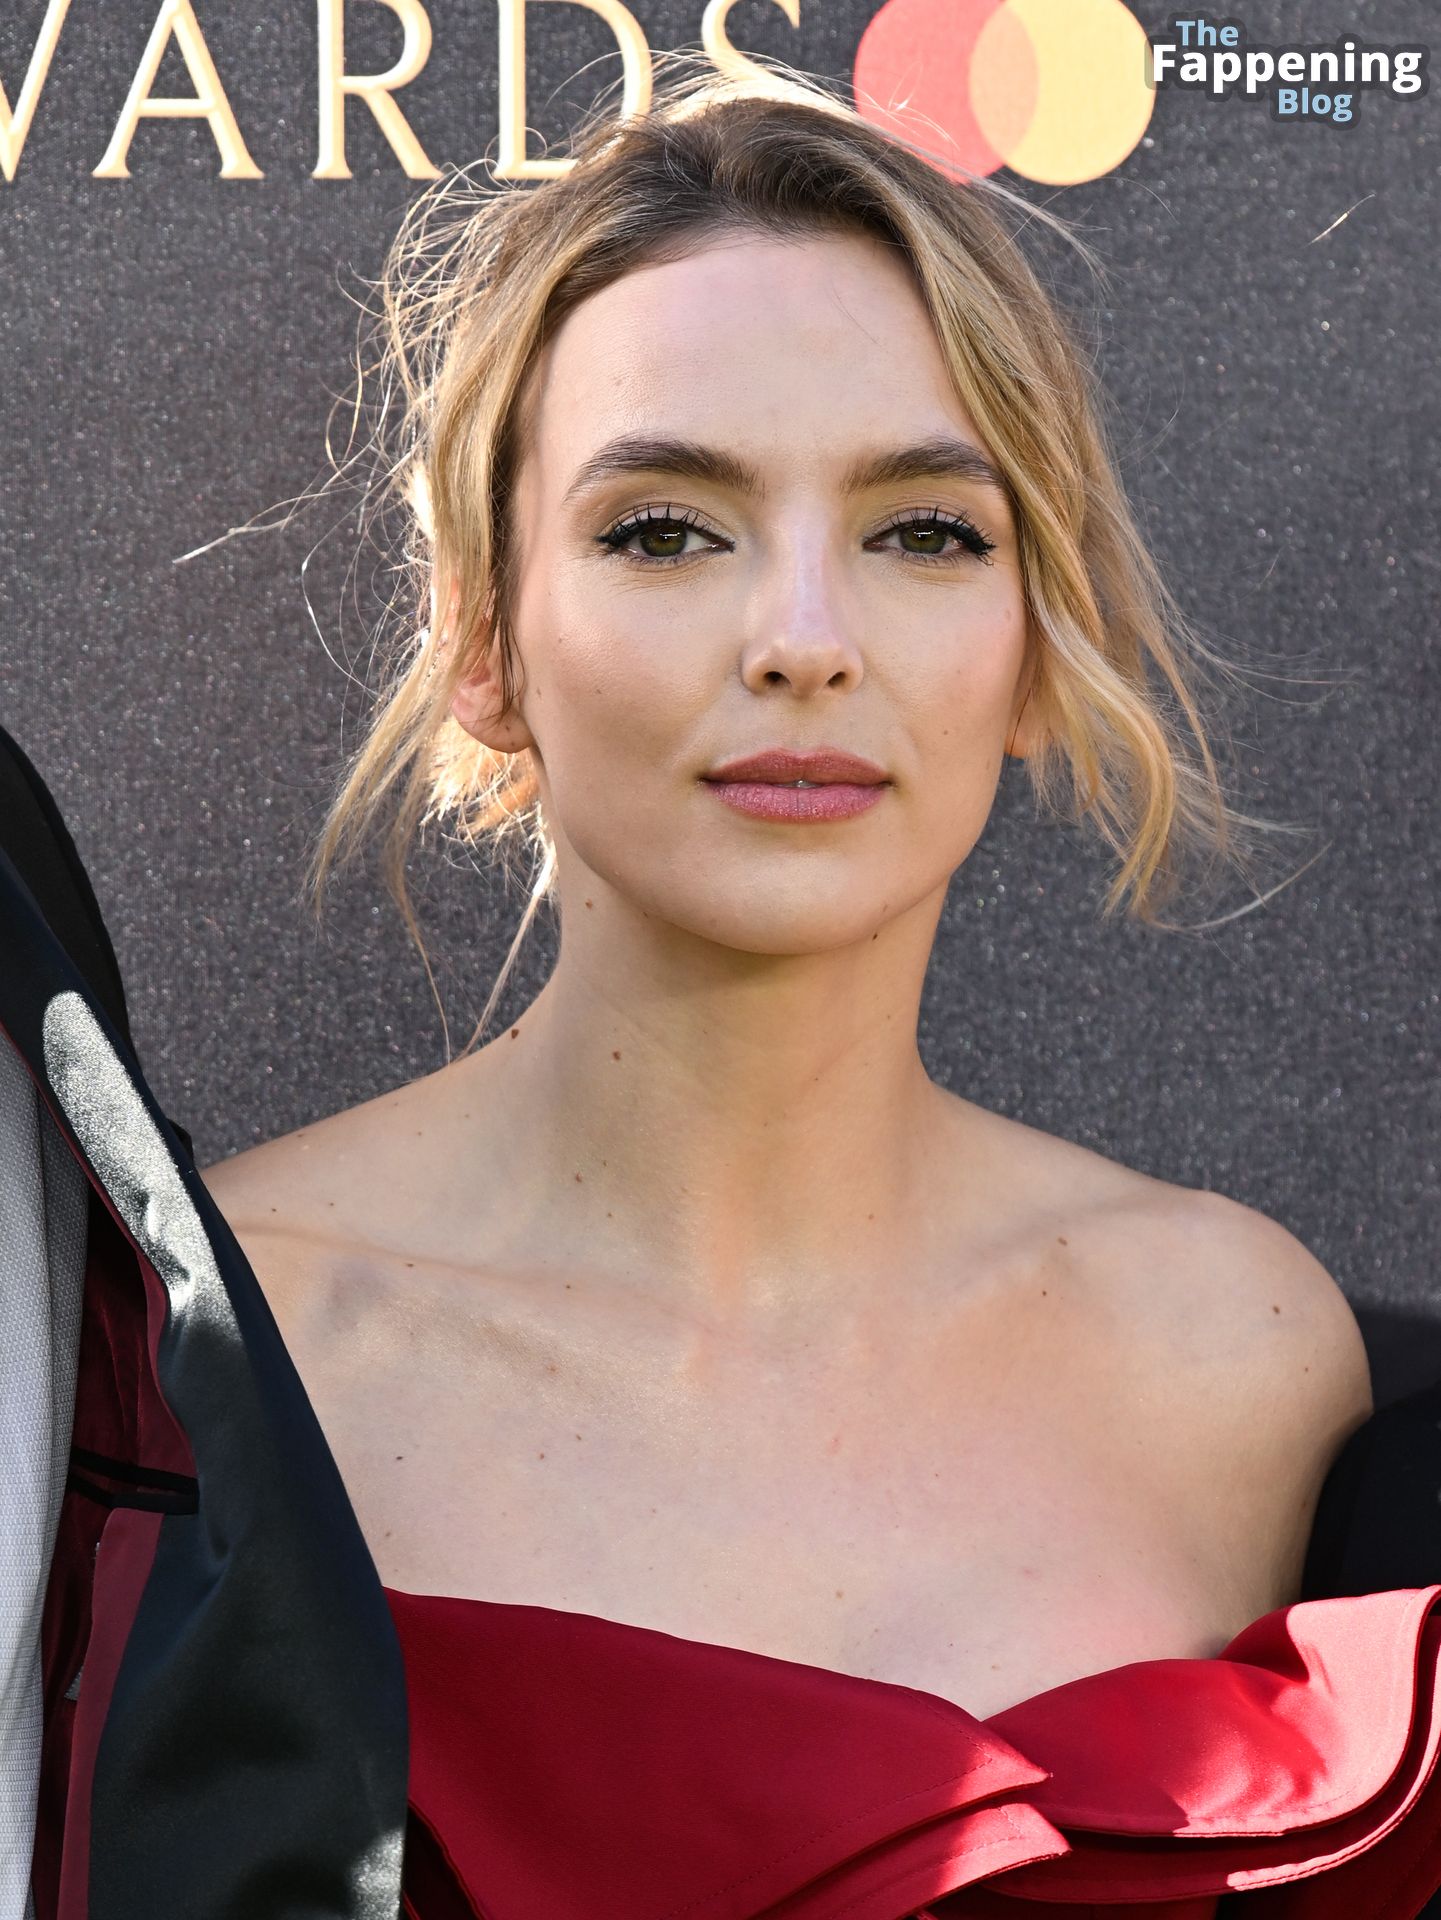 Jodie-Comer-Sexy-The-Fappening-Blog-25.jpg